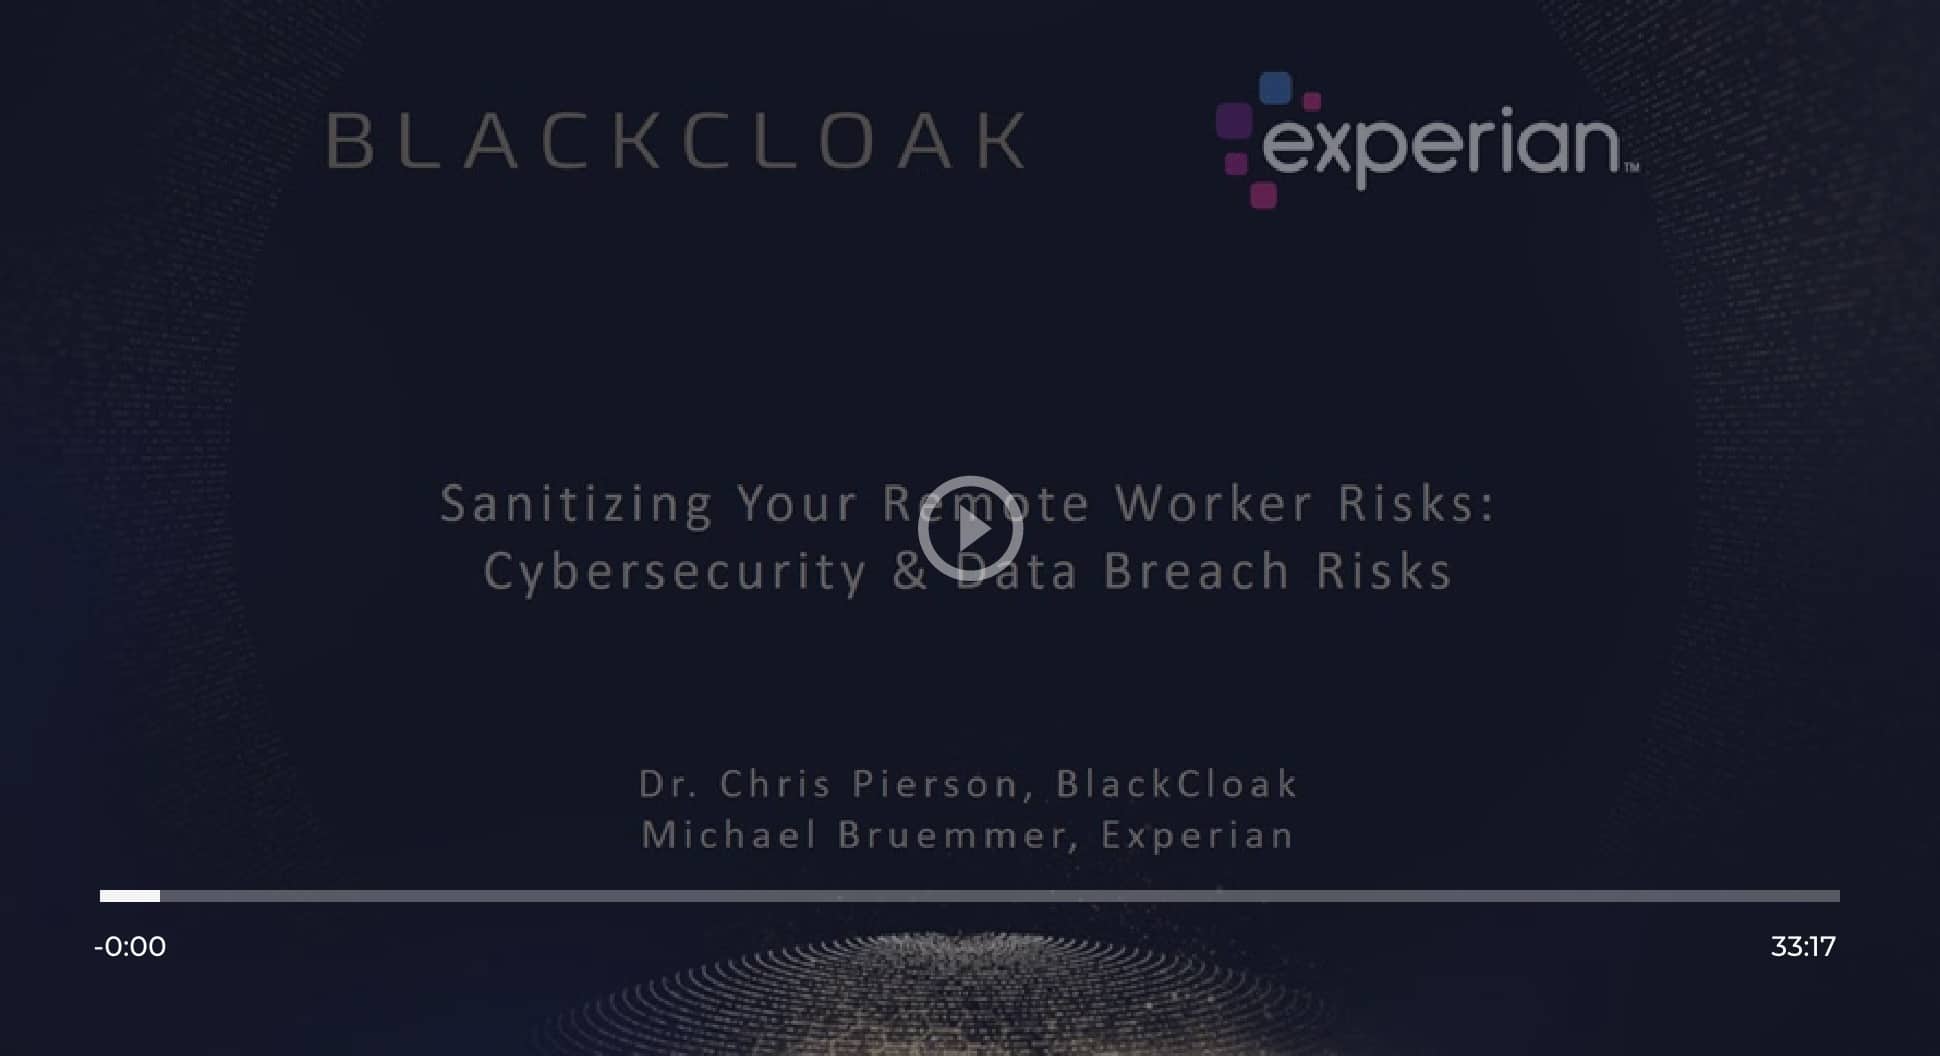 How to sanitize your remote worker digital risks